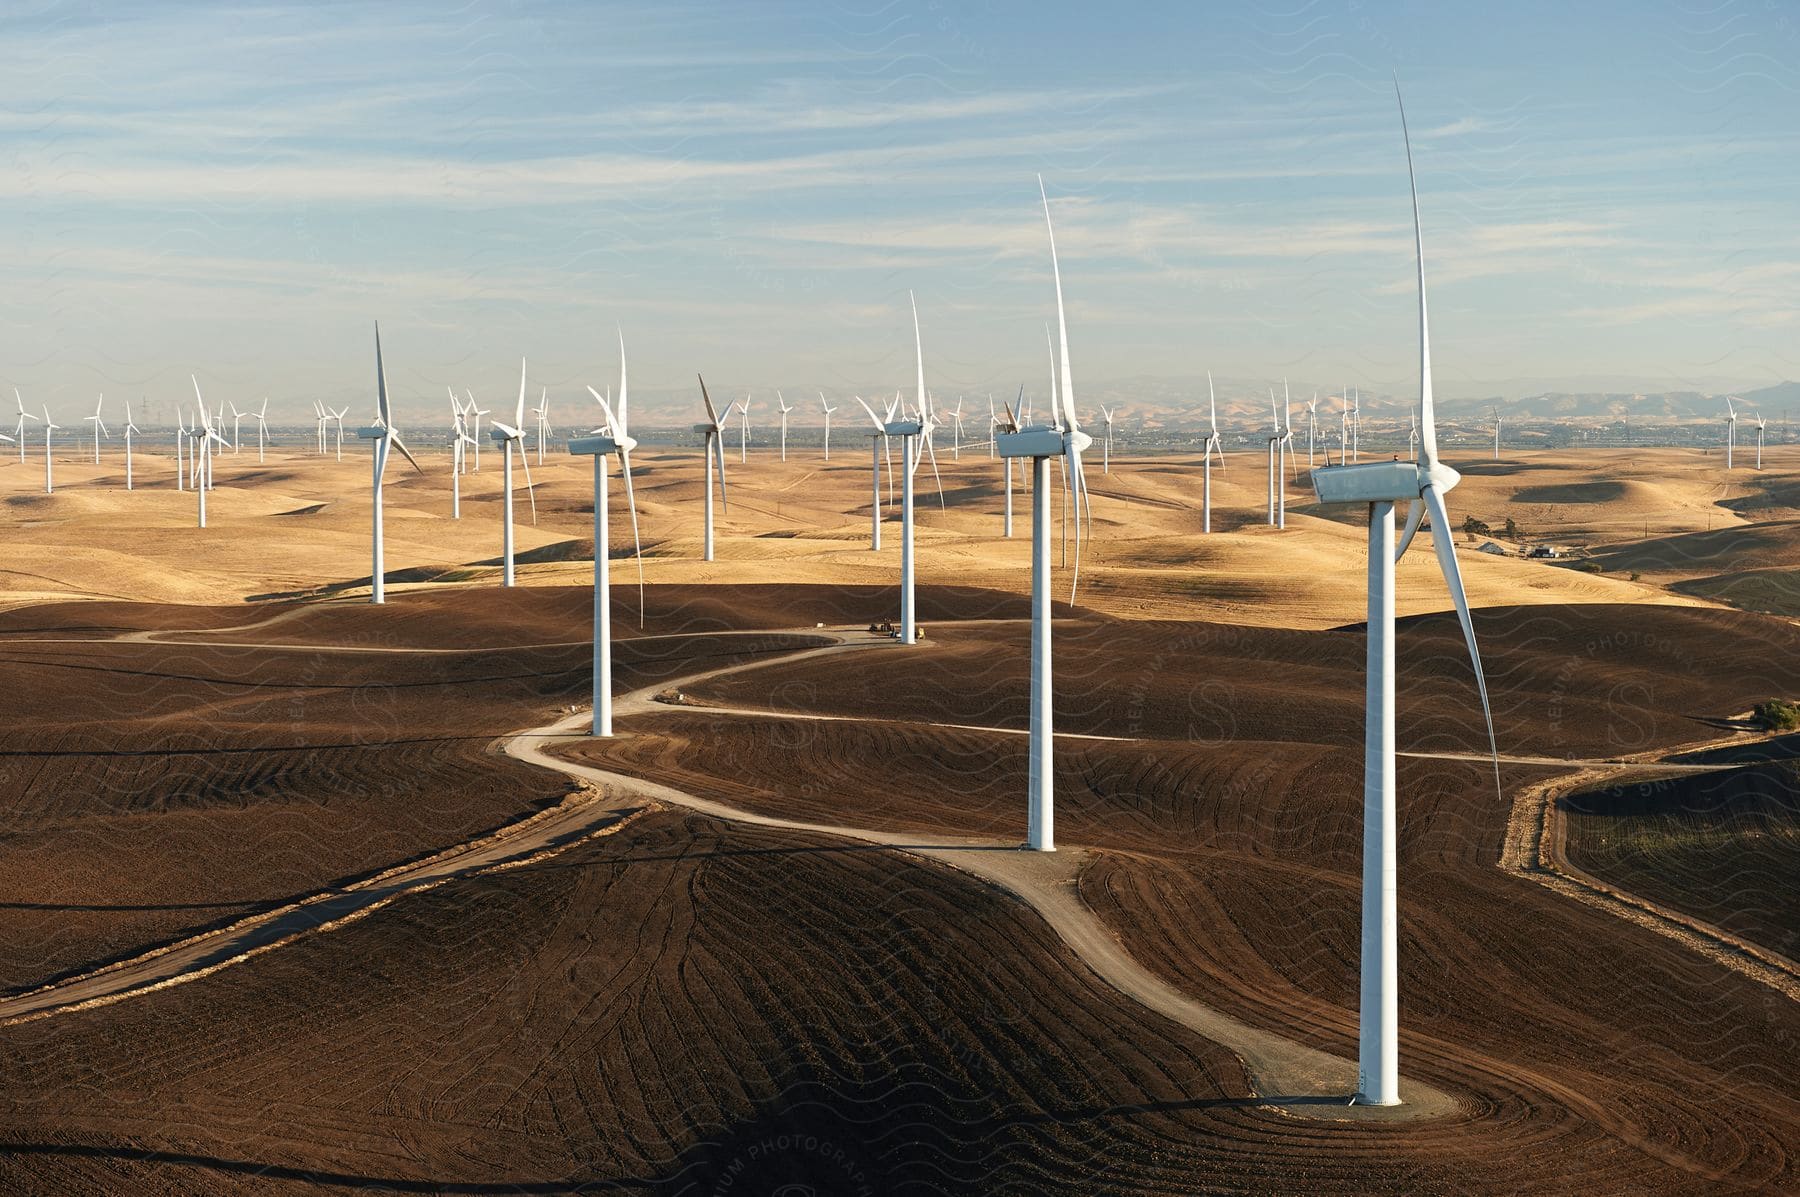 The sun shines upon turbines on a wind farm in the desert